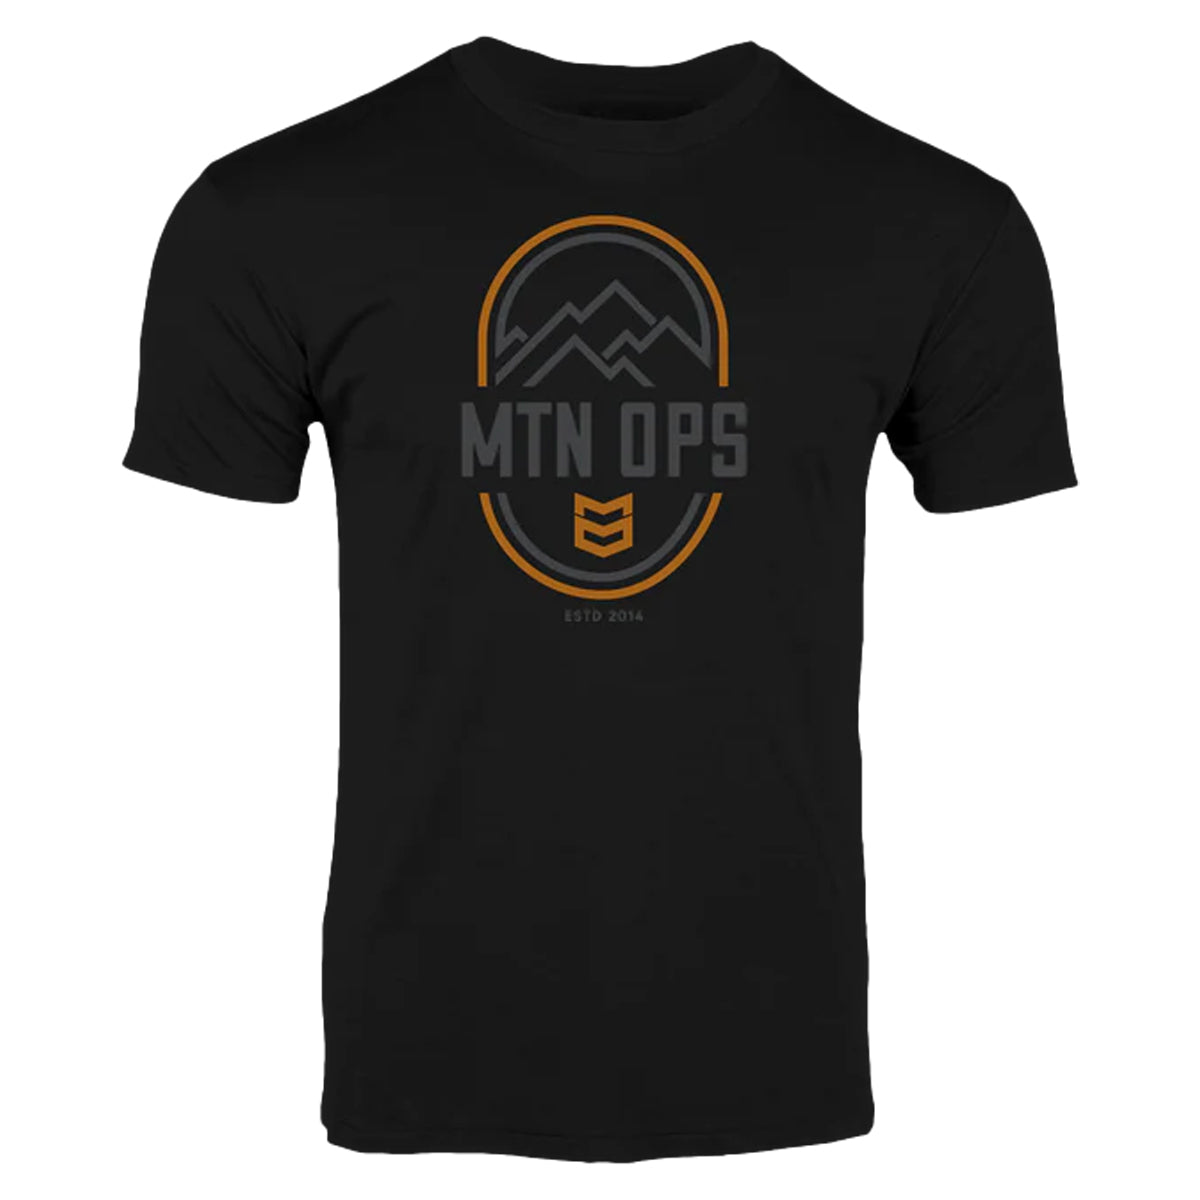 MTN OPS Scoped Tee in Black by GOHUNT | Mtn Ops - GOHUNT Shop